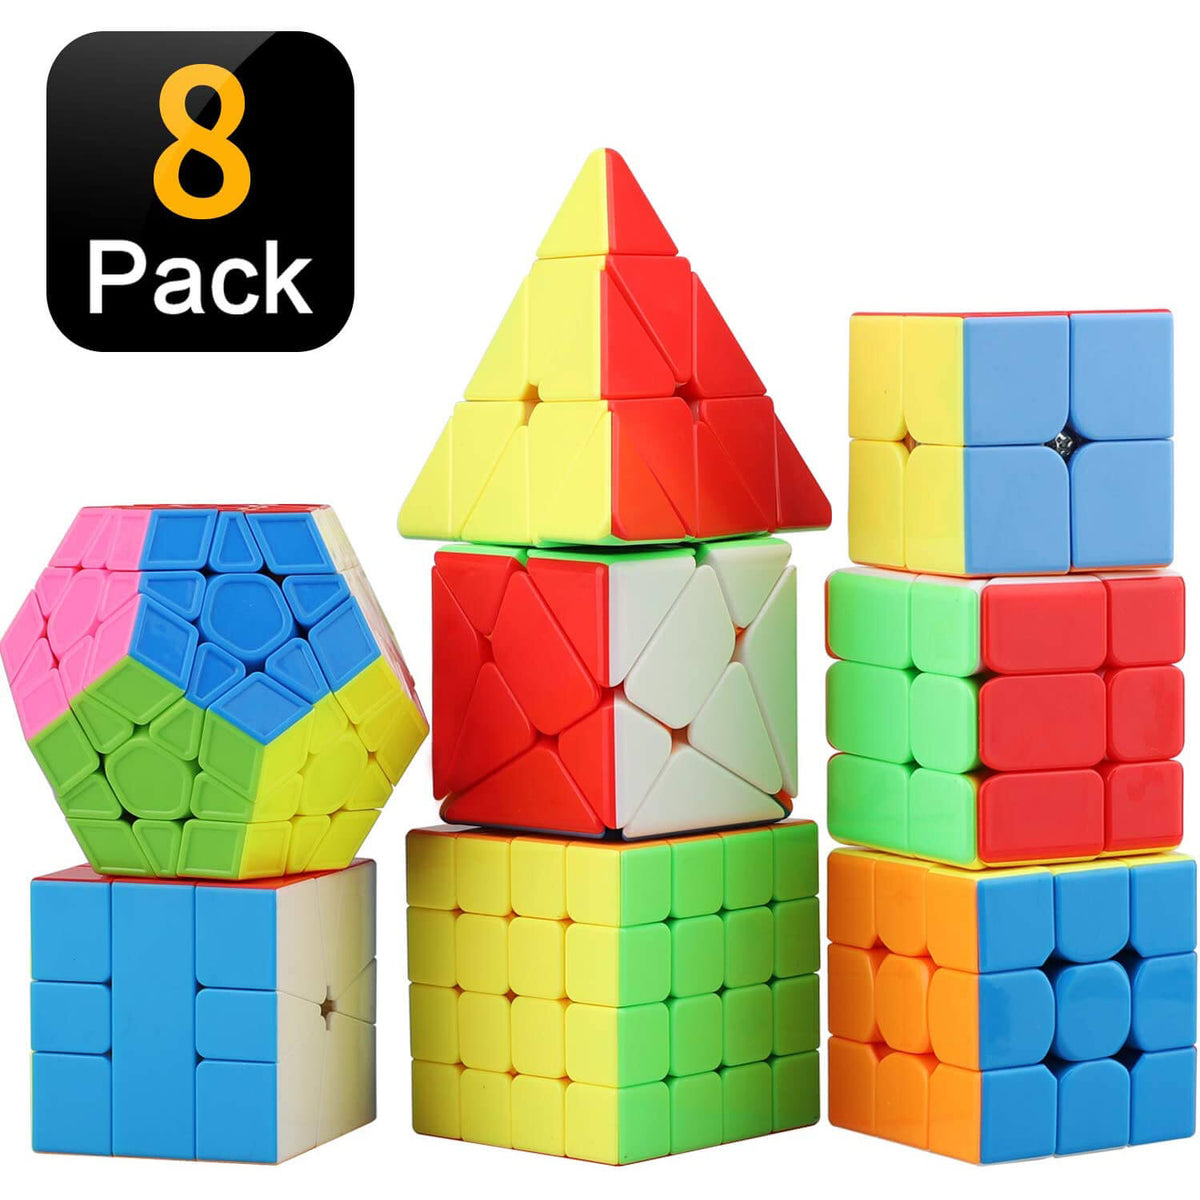 Rubik's Solve the Cube Bundle 4 Pack, Toy for Kids Ages 8 and Up 